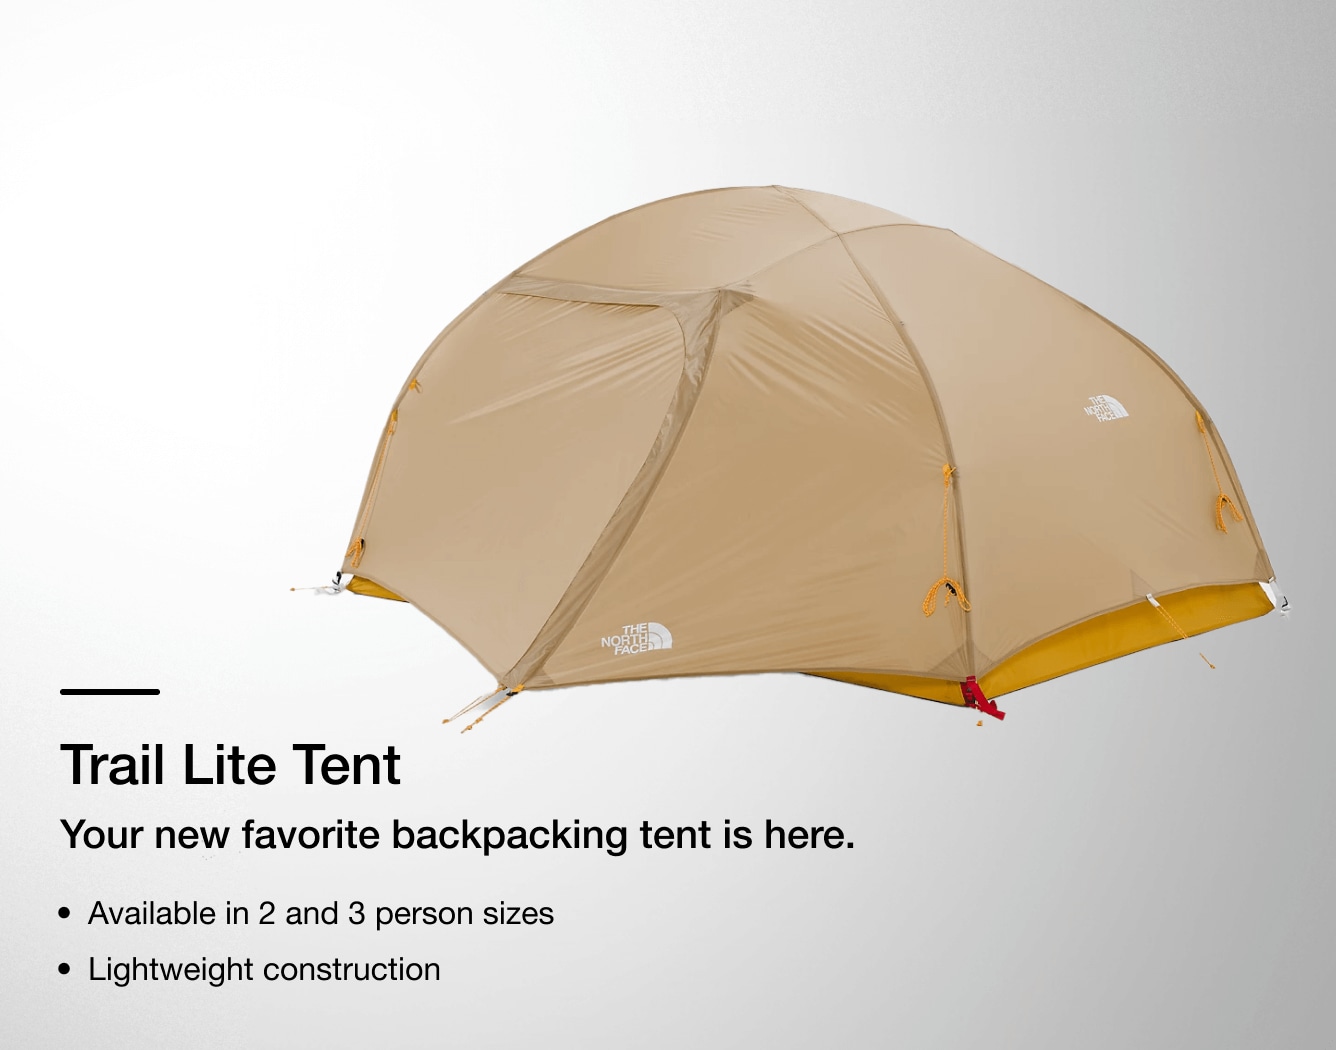 Image detailing features of the Trail Lite tent from The North Face.